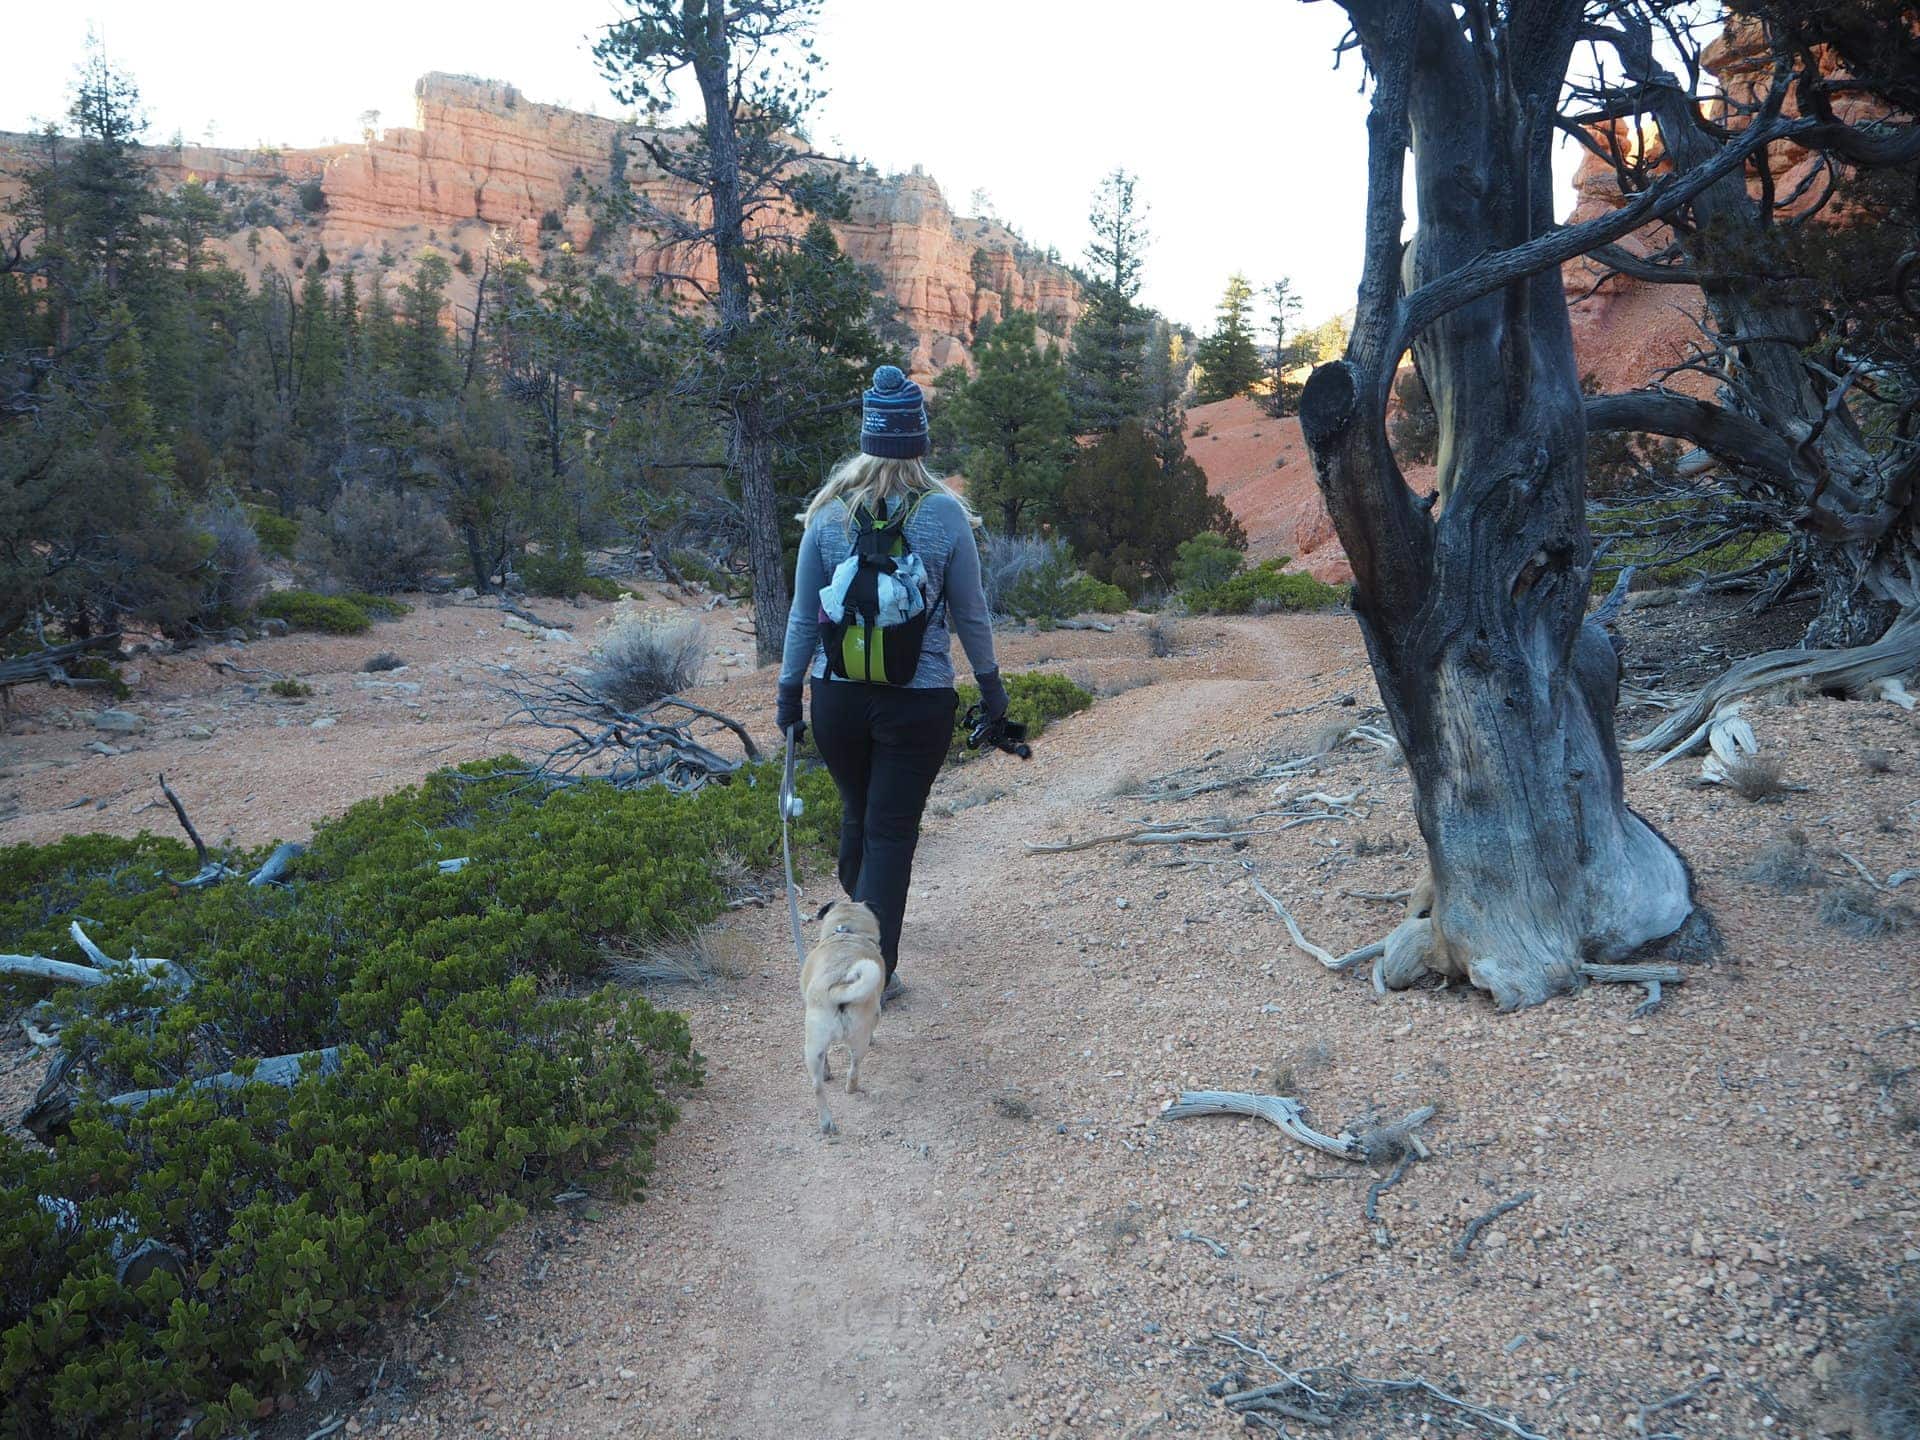 Lindsey hiking with Lexi close behind her